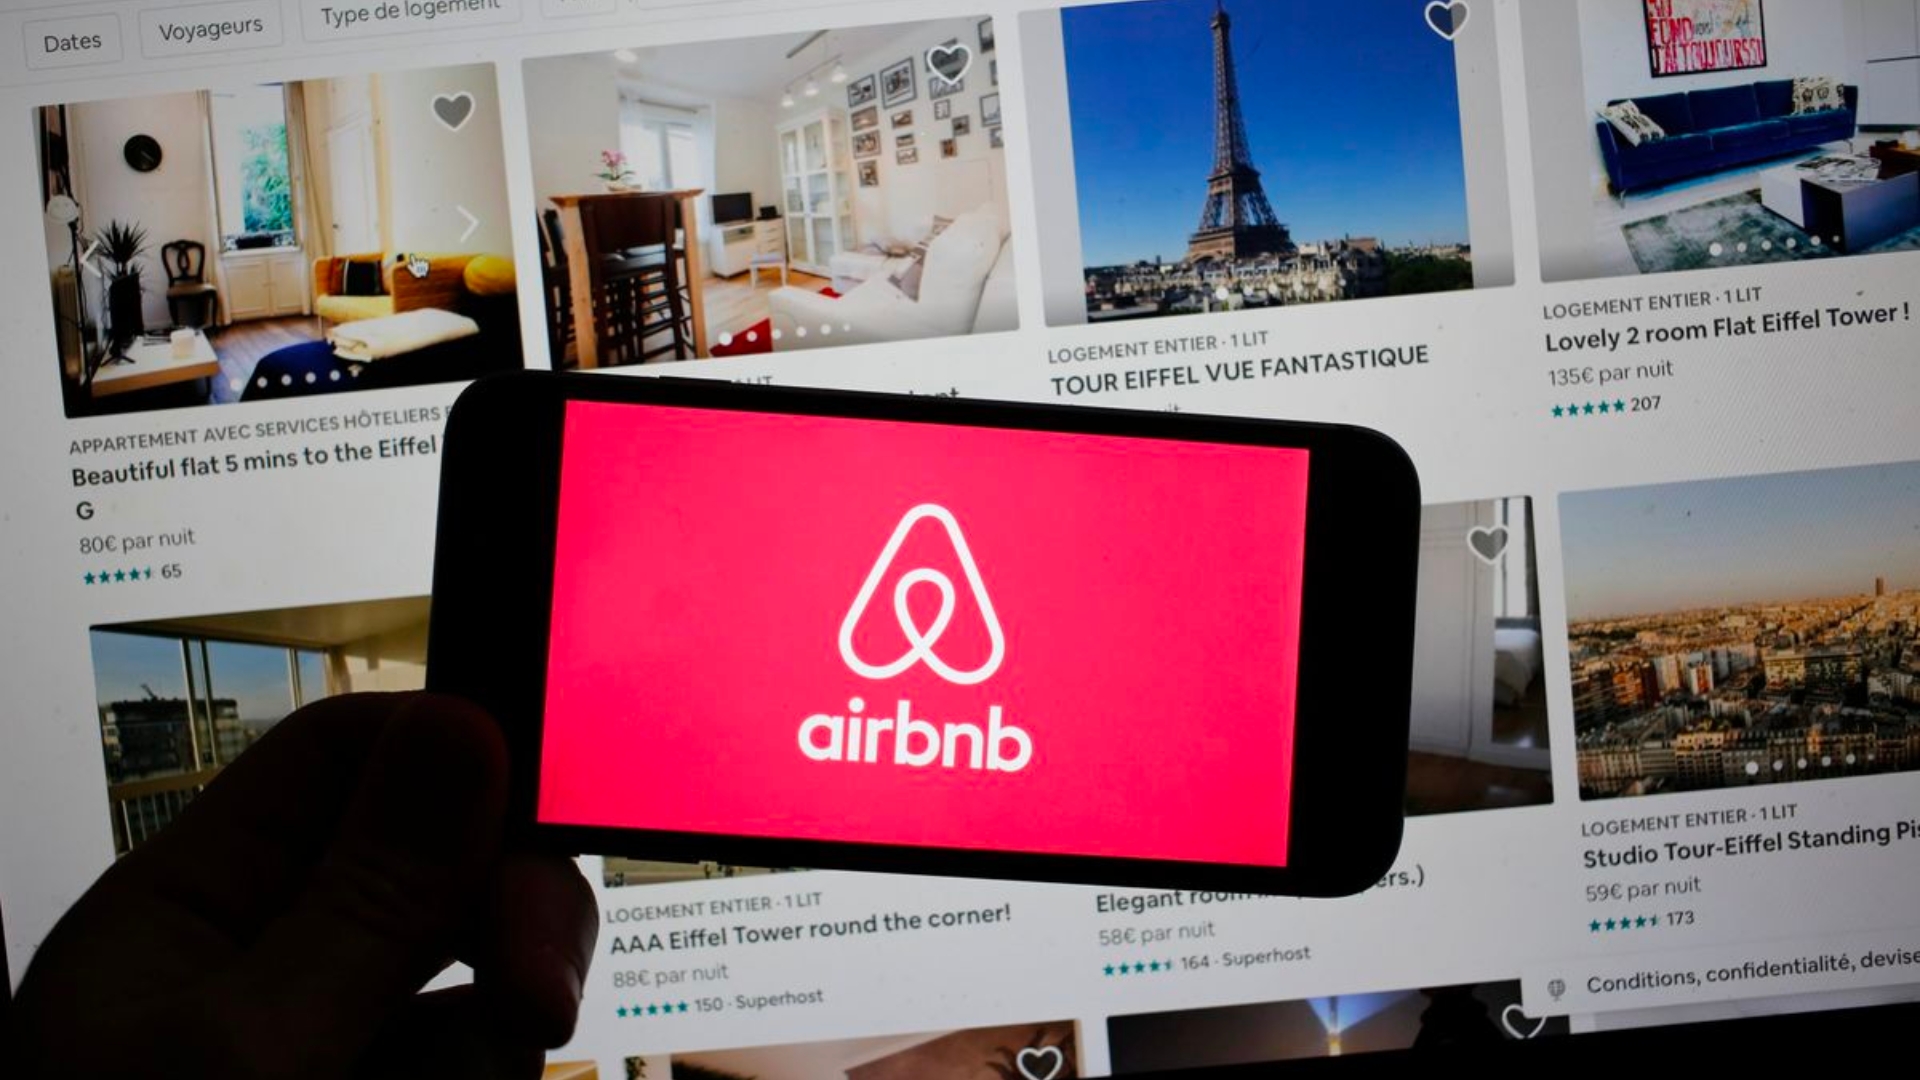 white airbnb logo with red background on the phone that held by a person's hand in silhouette and the airbnb website as a background